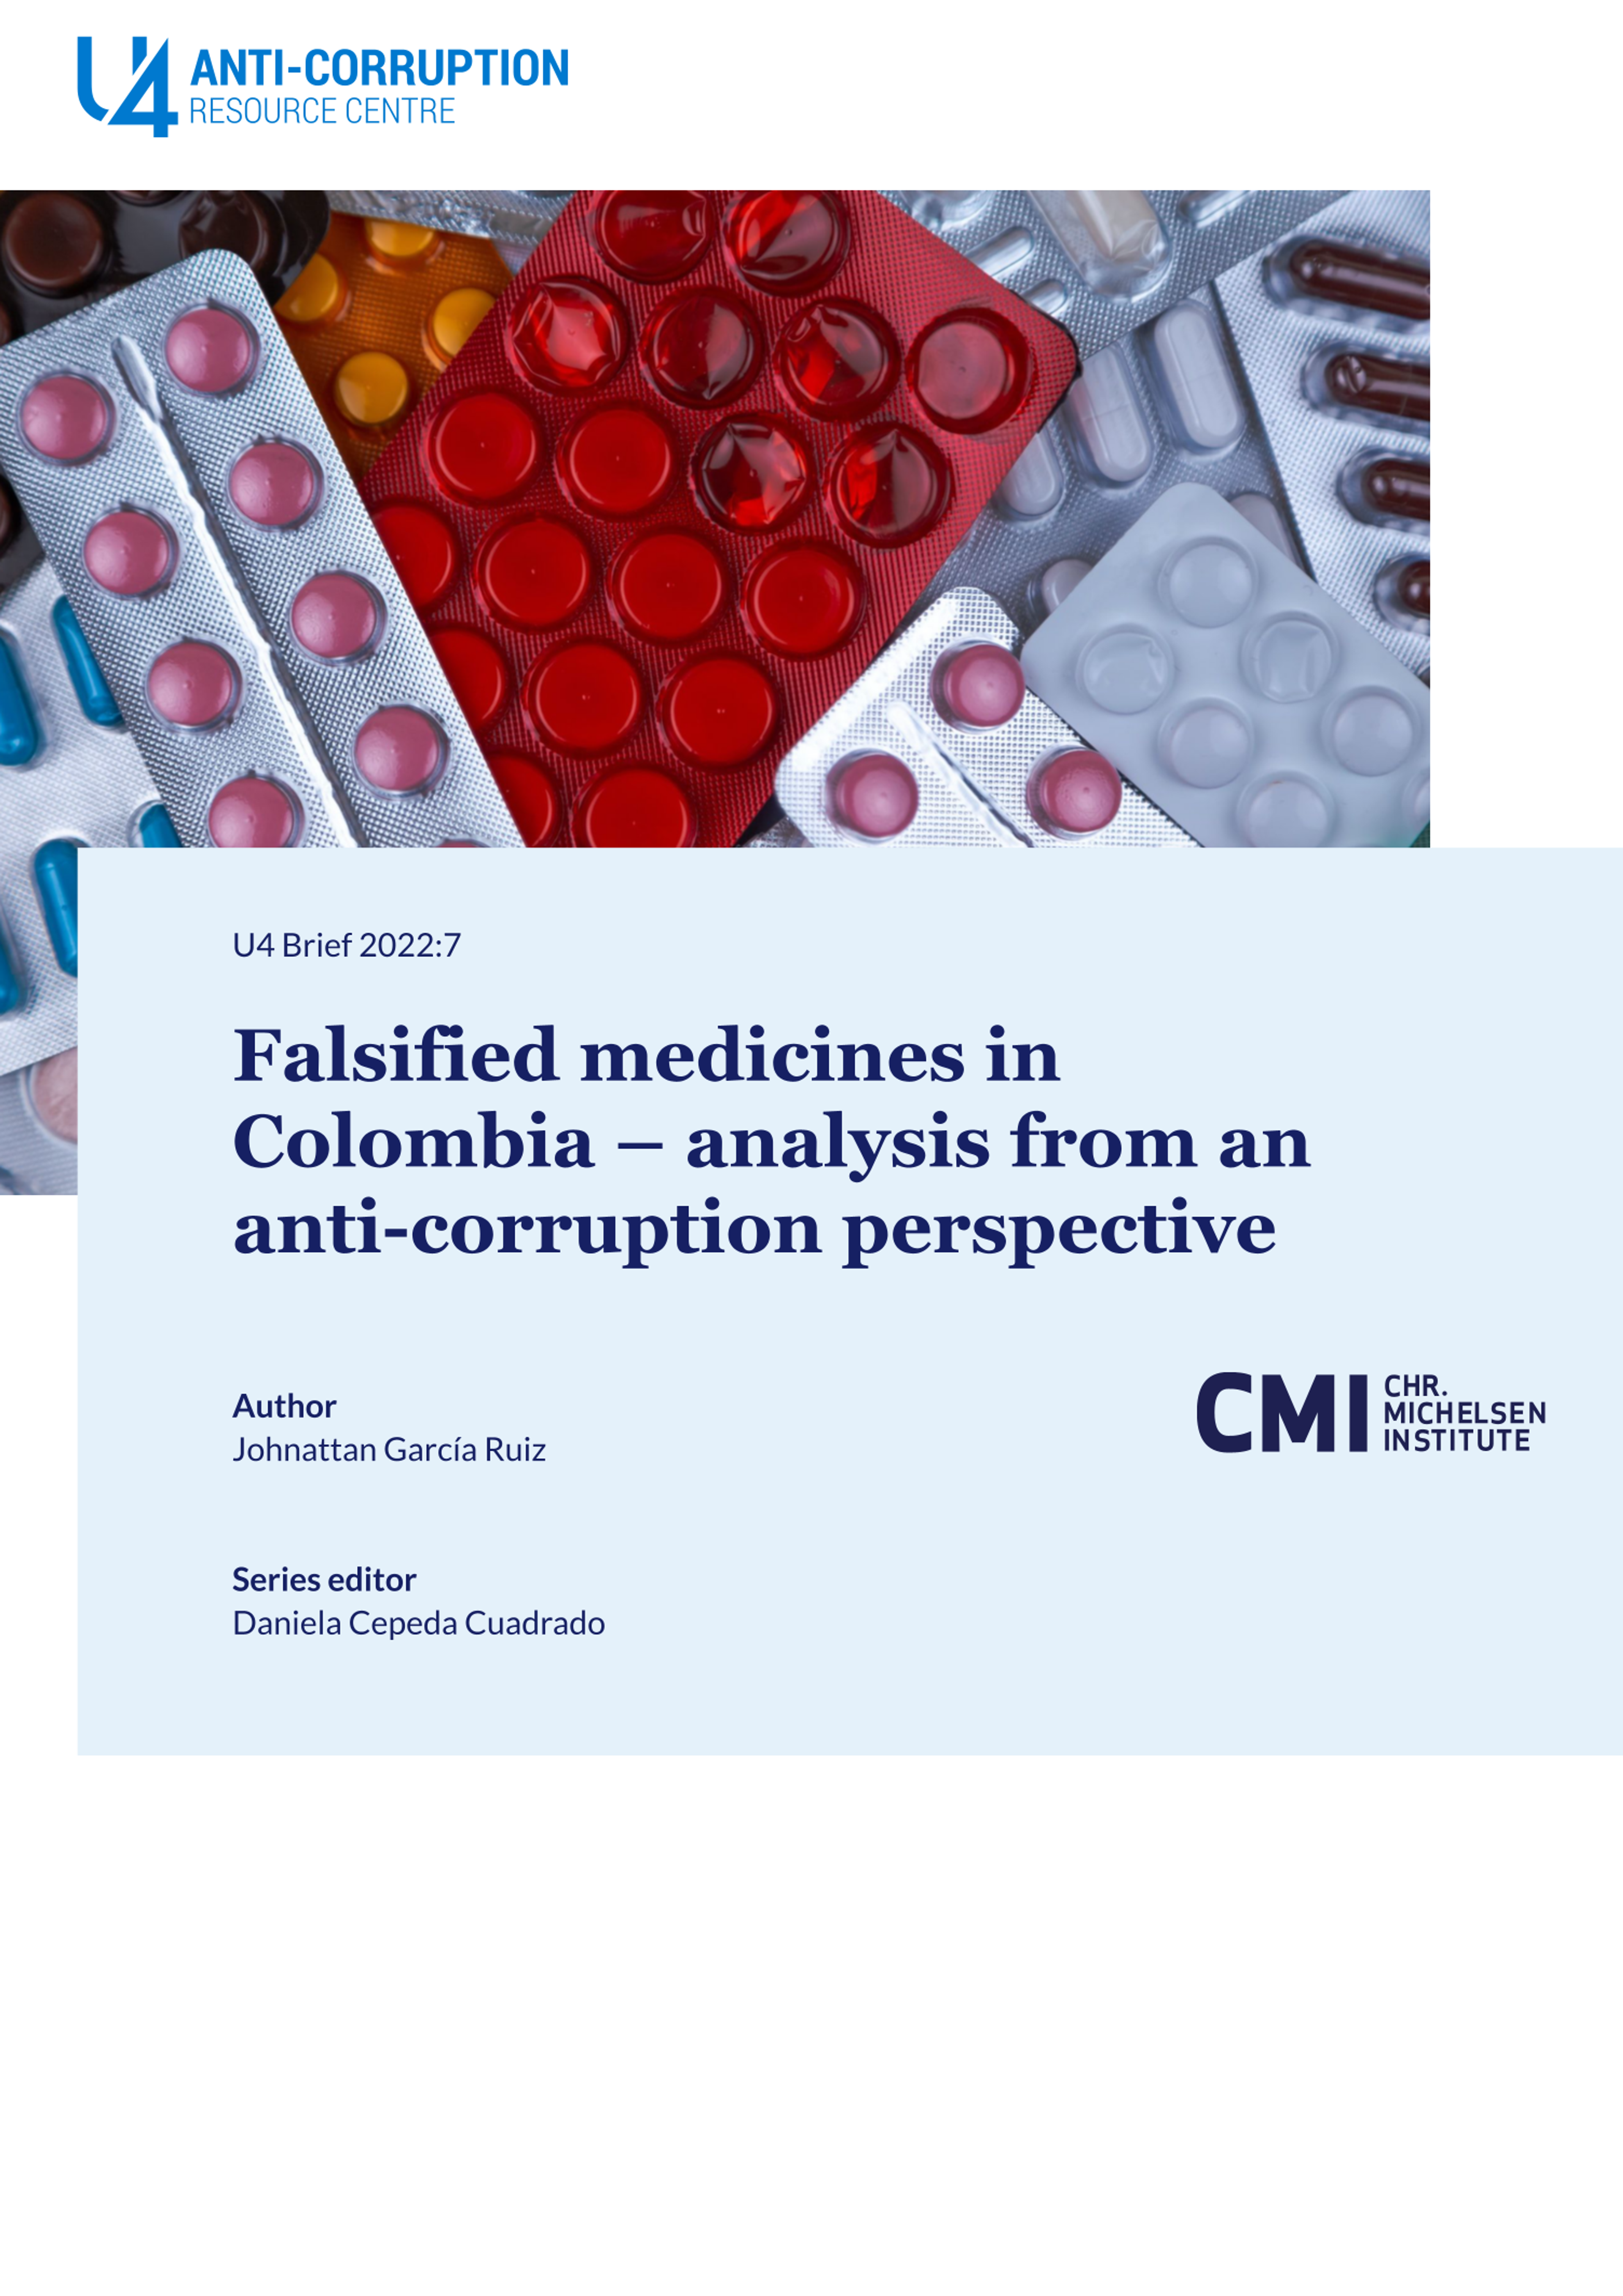 Falsified medicines in Colombia – analysis from an anti-corruption perspective